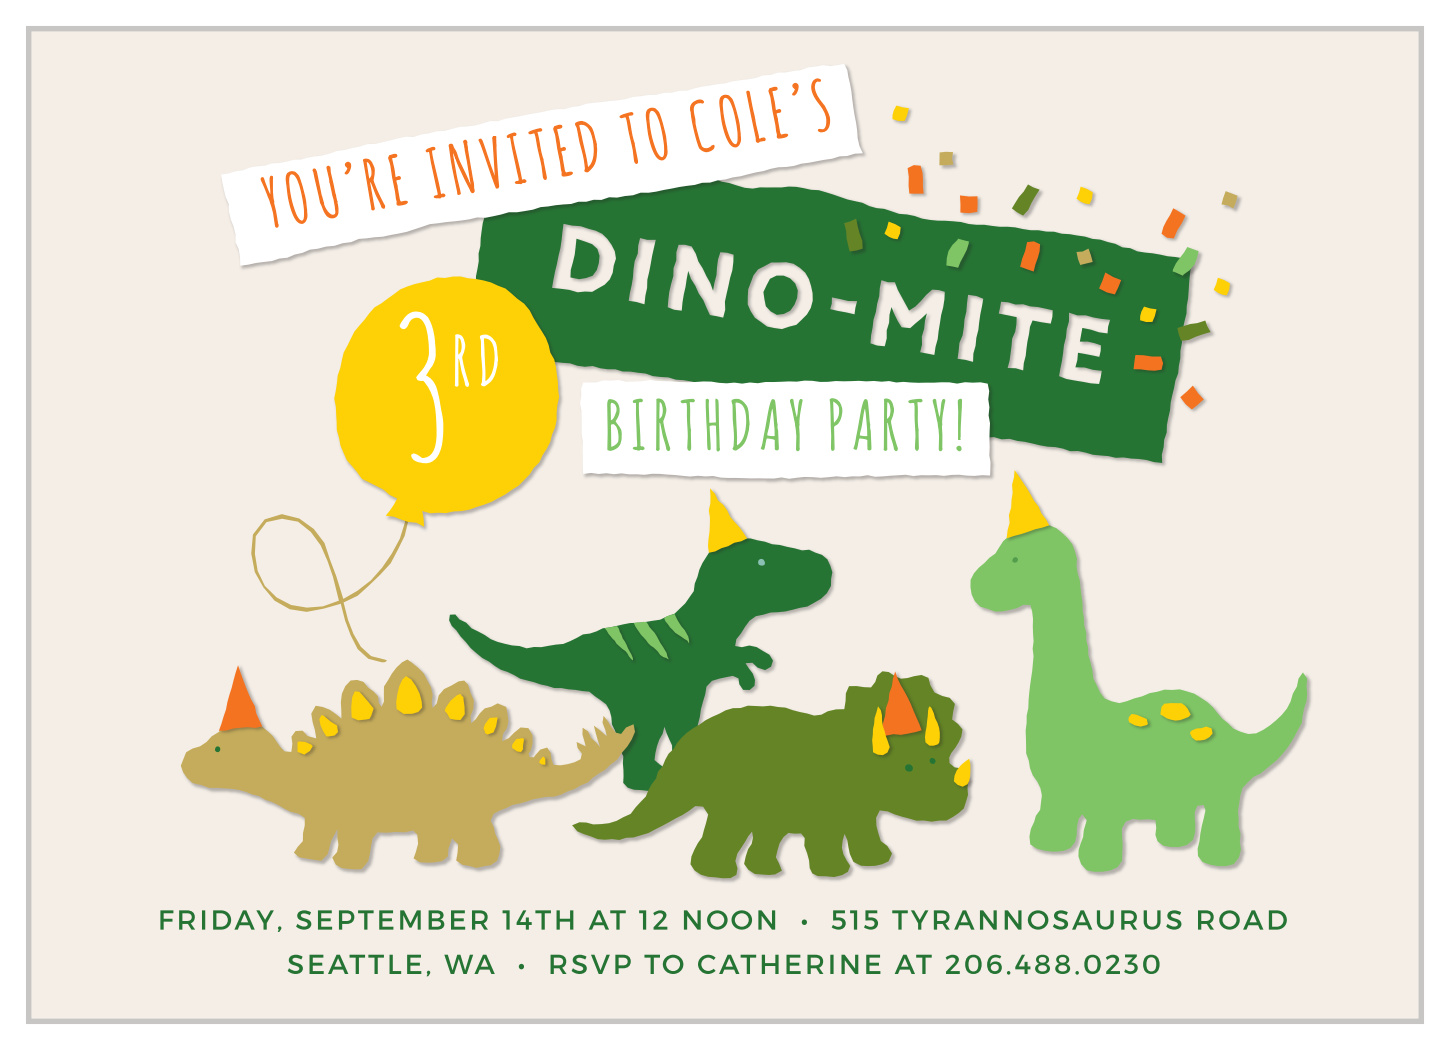 Chrome Dino Party Time Greeting Card